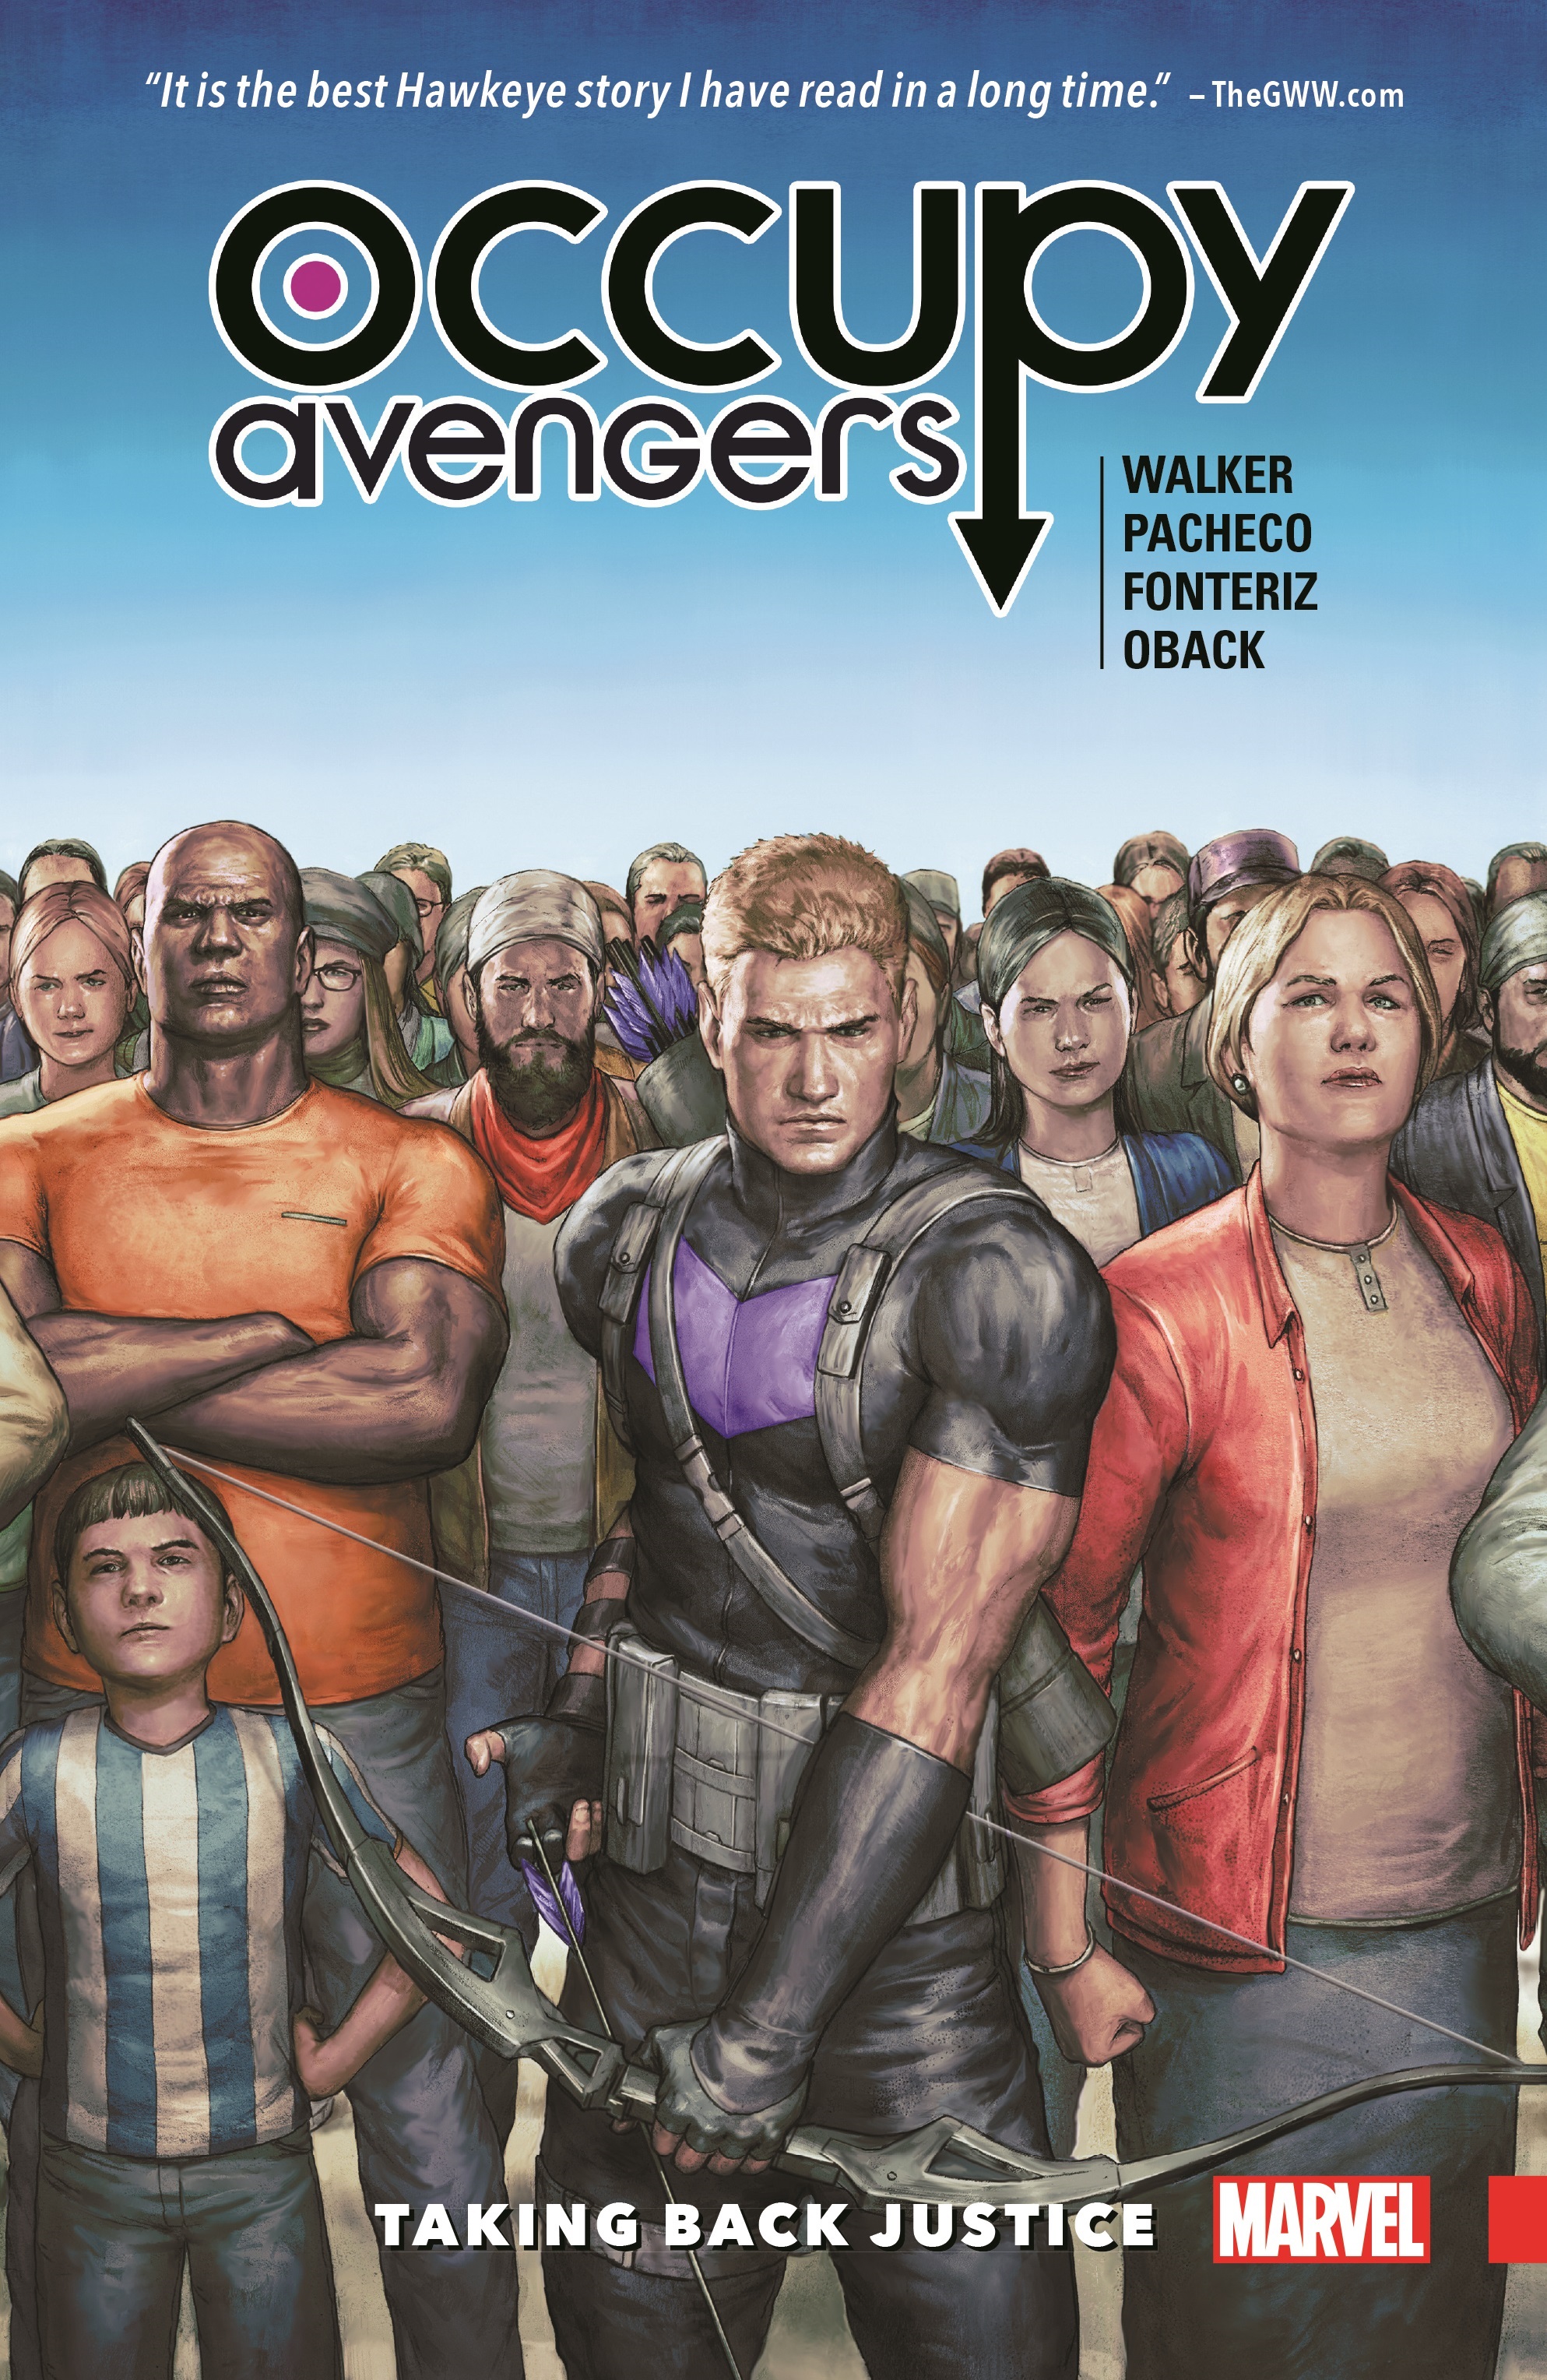 Occupy Avengers Vol. 1: Taking Back Justice (Trade Paperback)